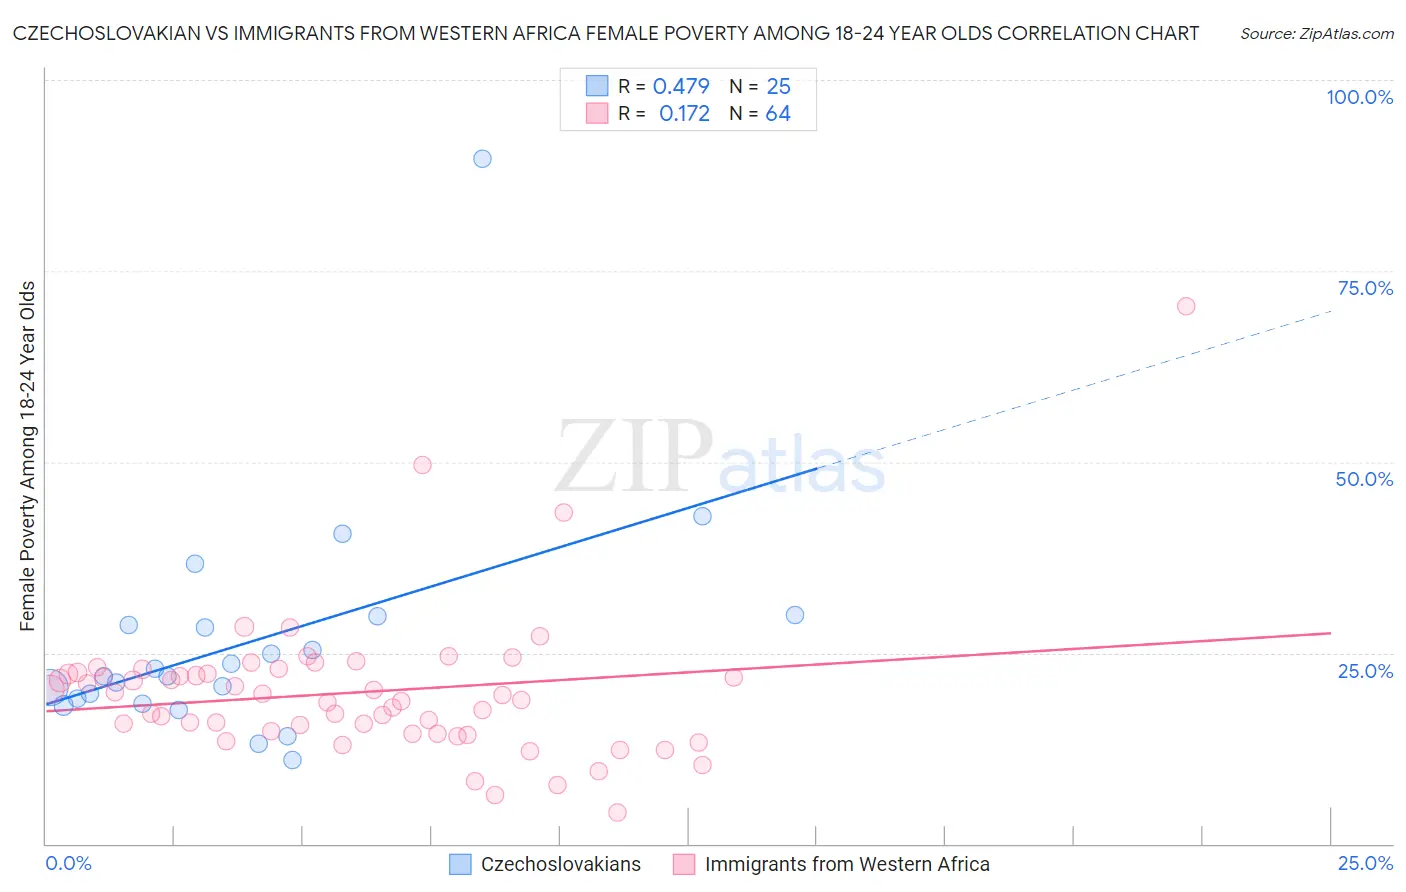 Czechoslovakian vs Immigrants from Western Africa Female Poverty Among 18-24 Year Olds